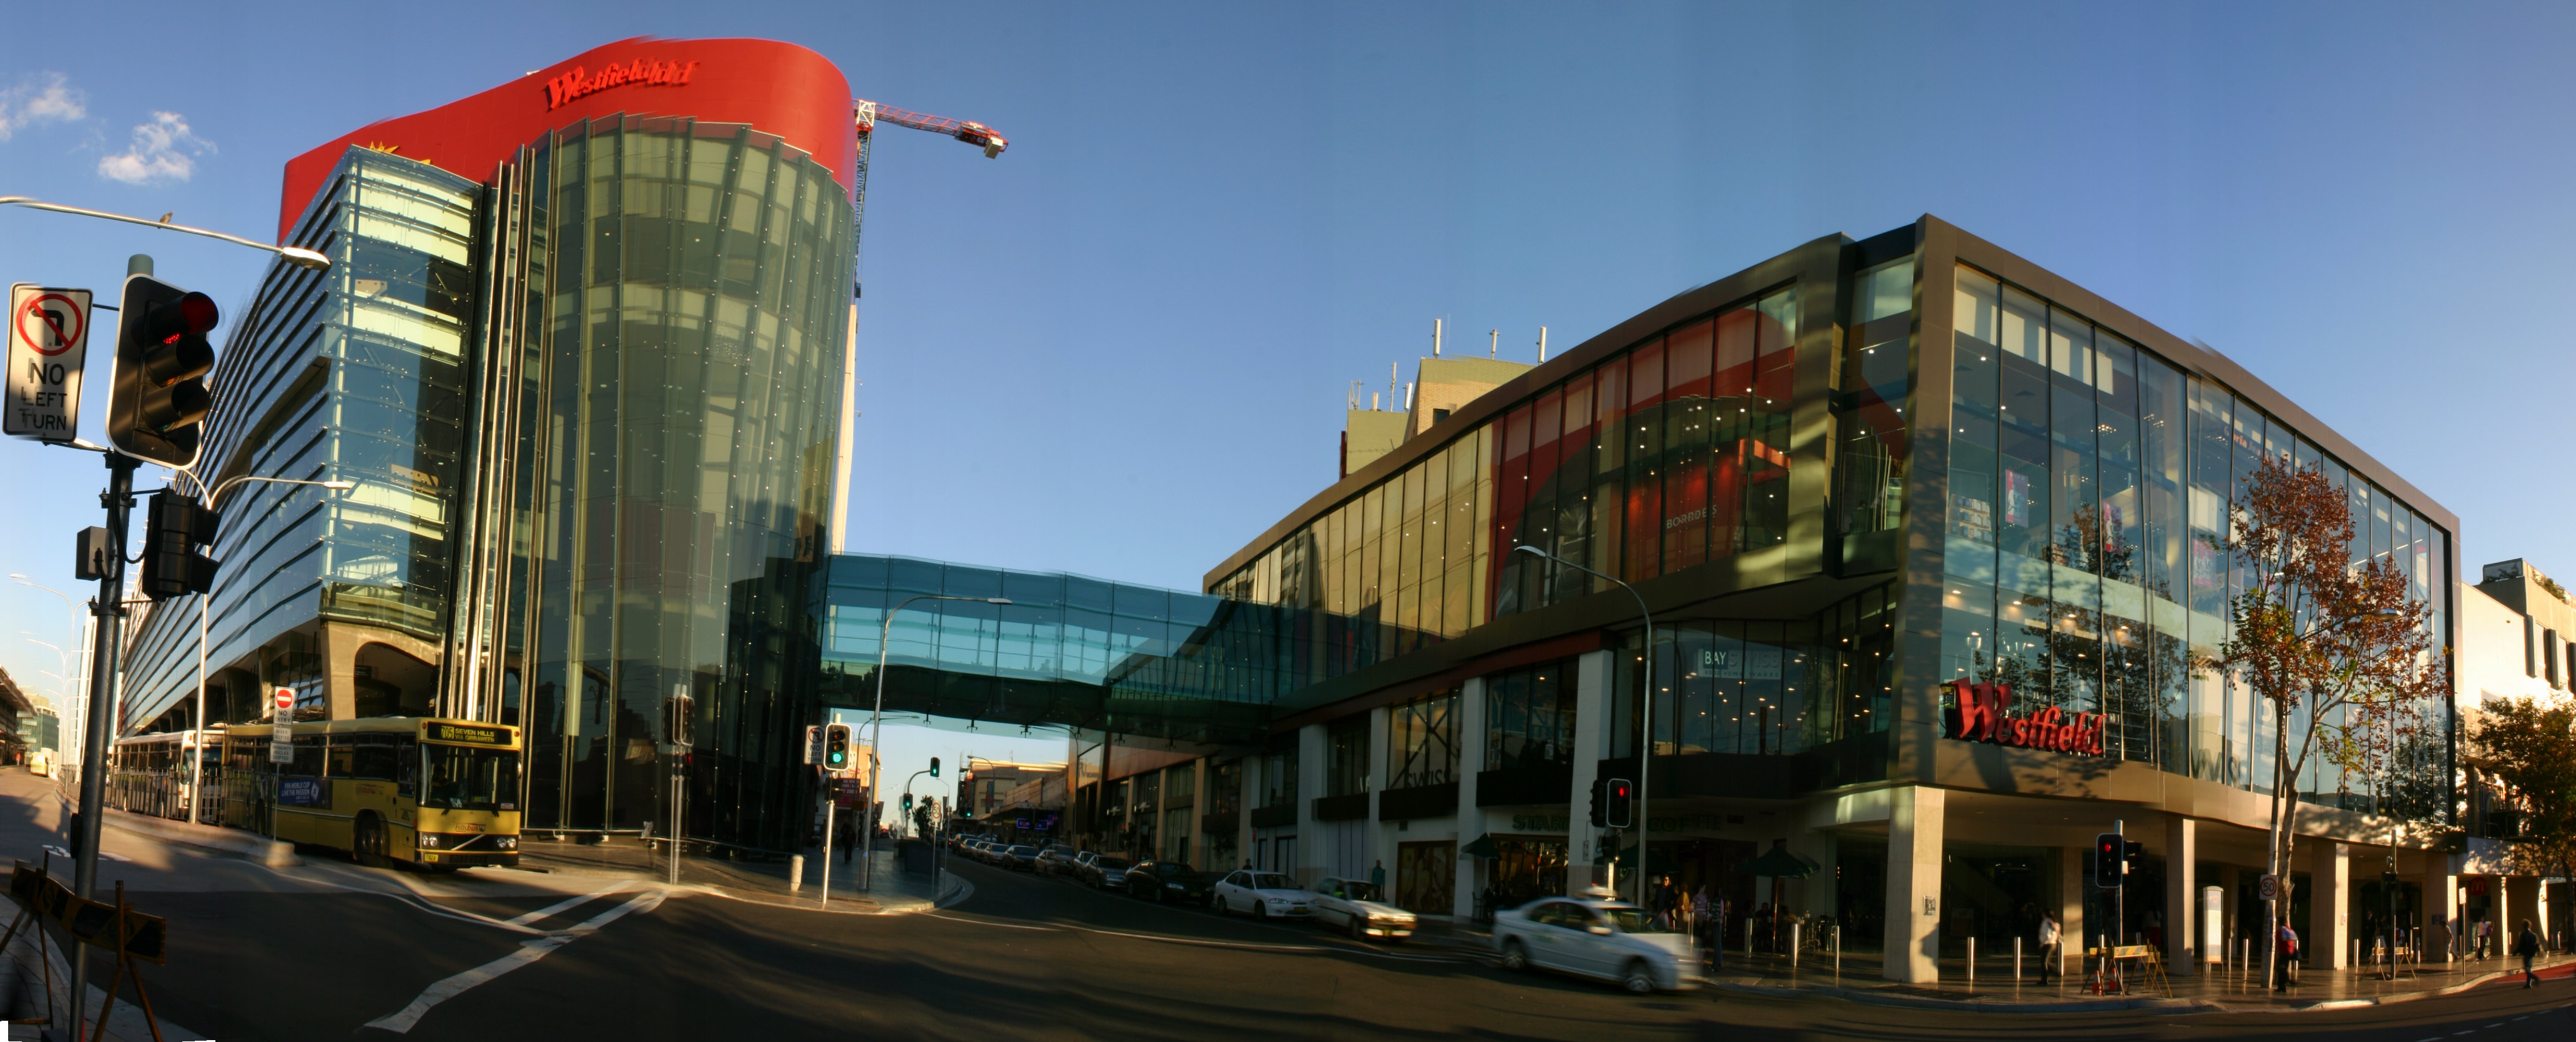 We are very accessible from Westfield Parramatta.